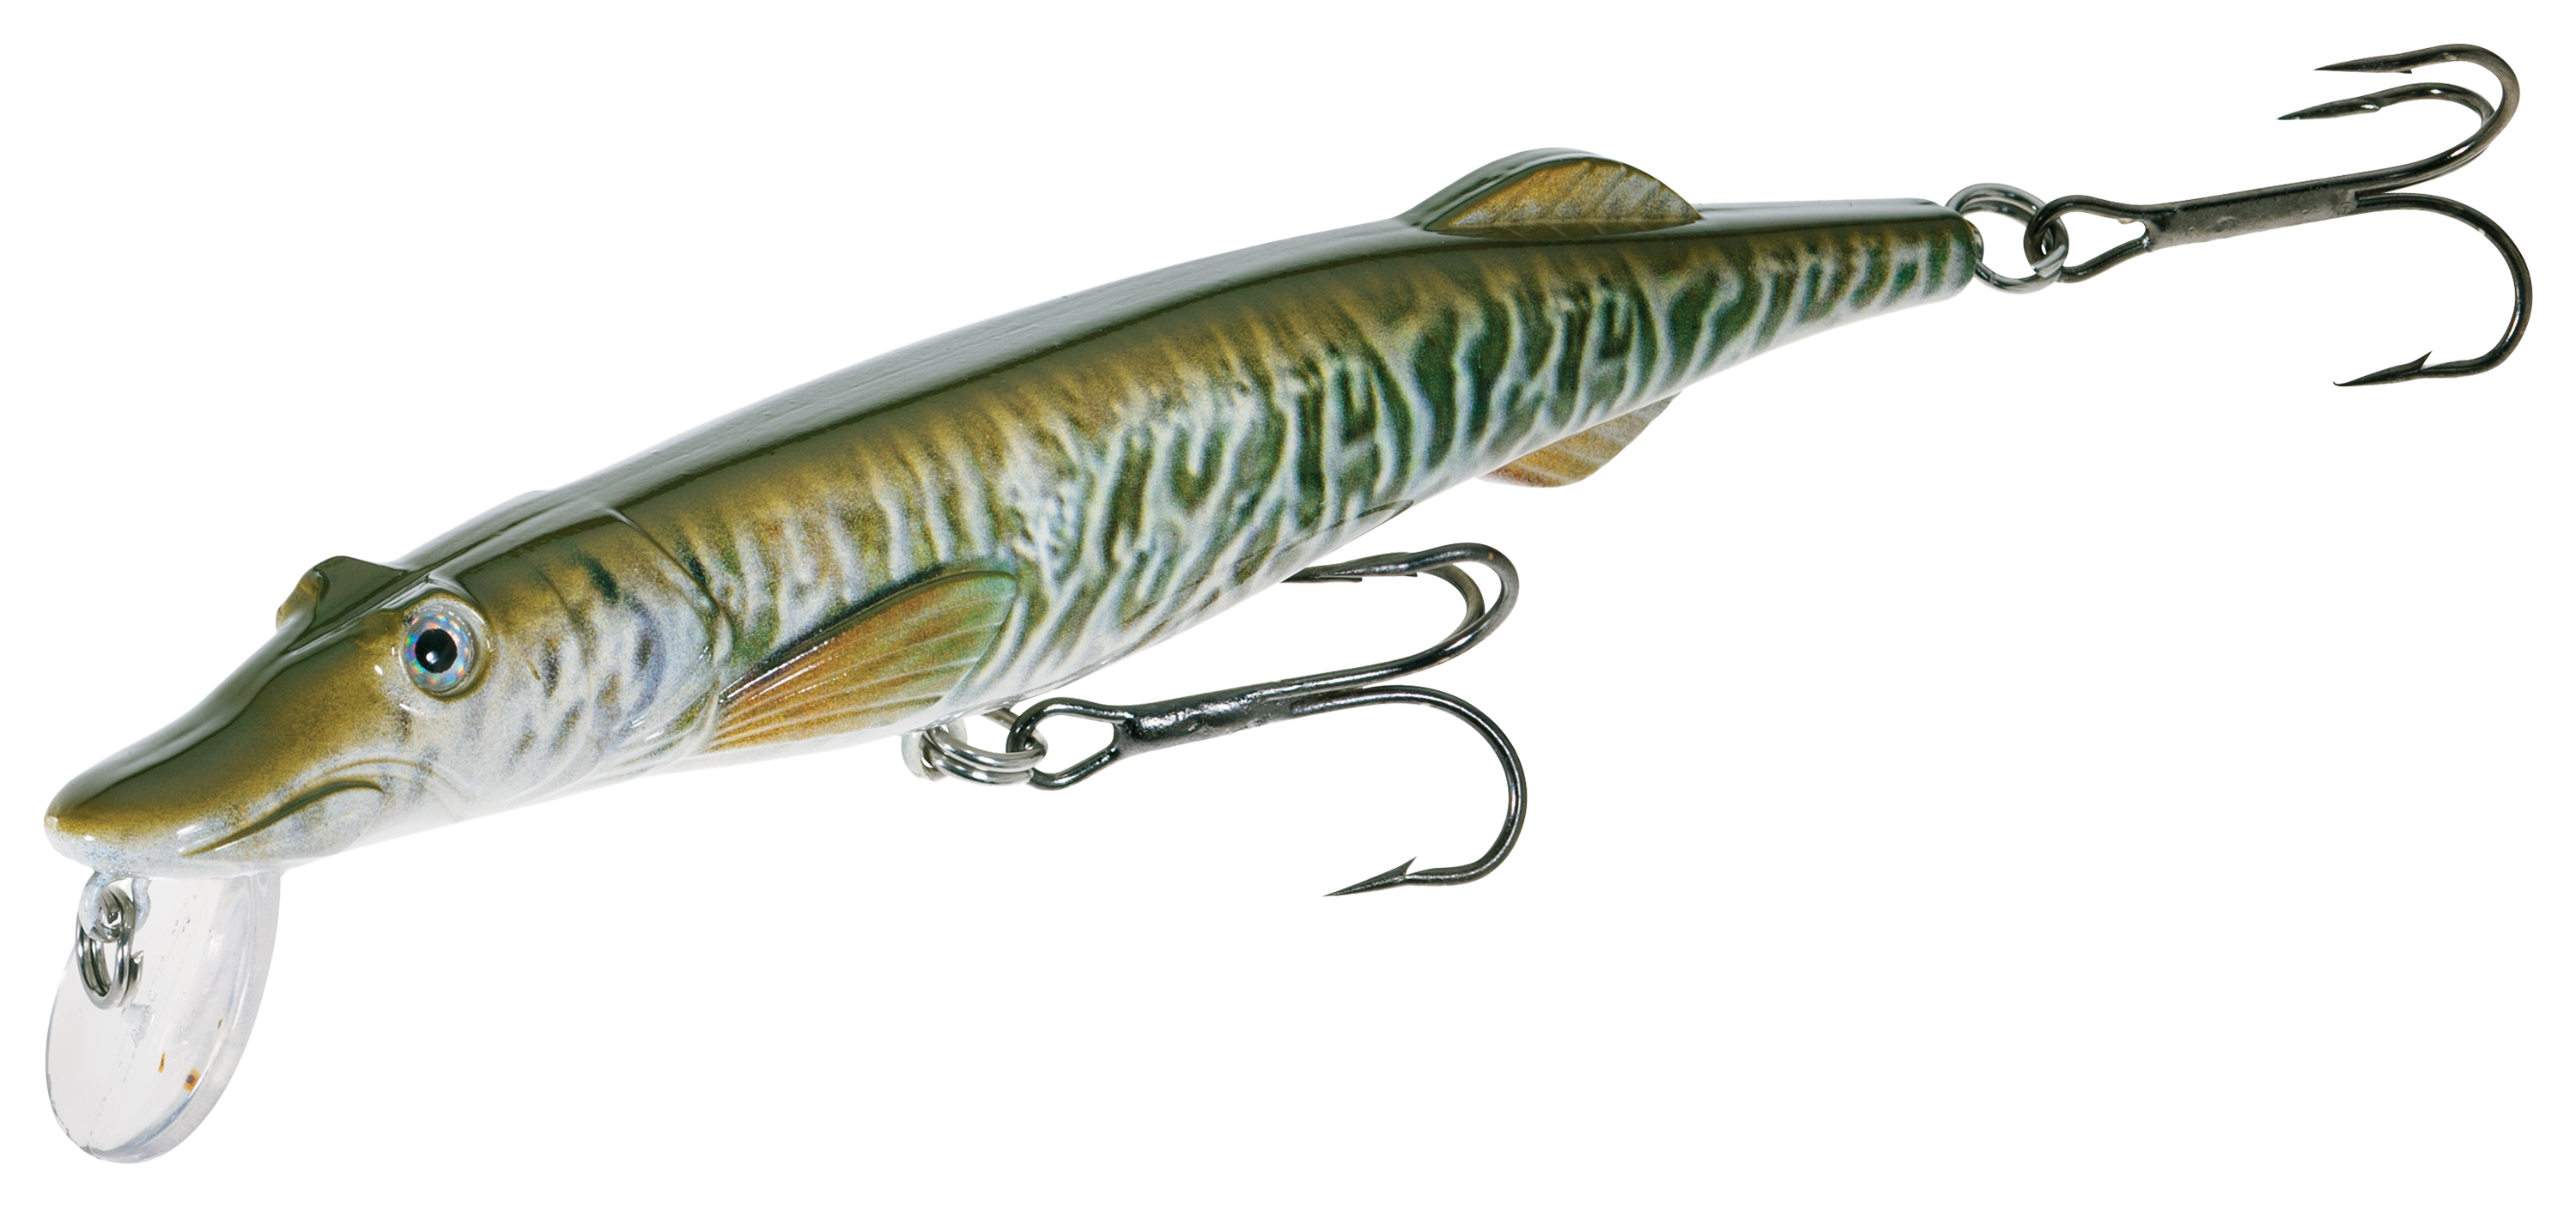 Minnows and Stick Baits: Hard Plastic & Wood Fishing Lures